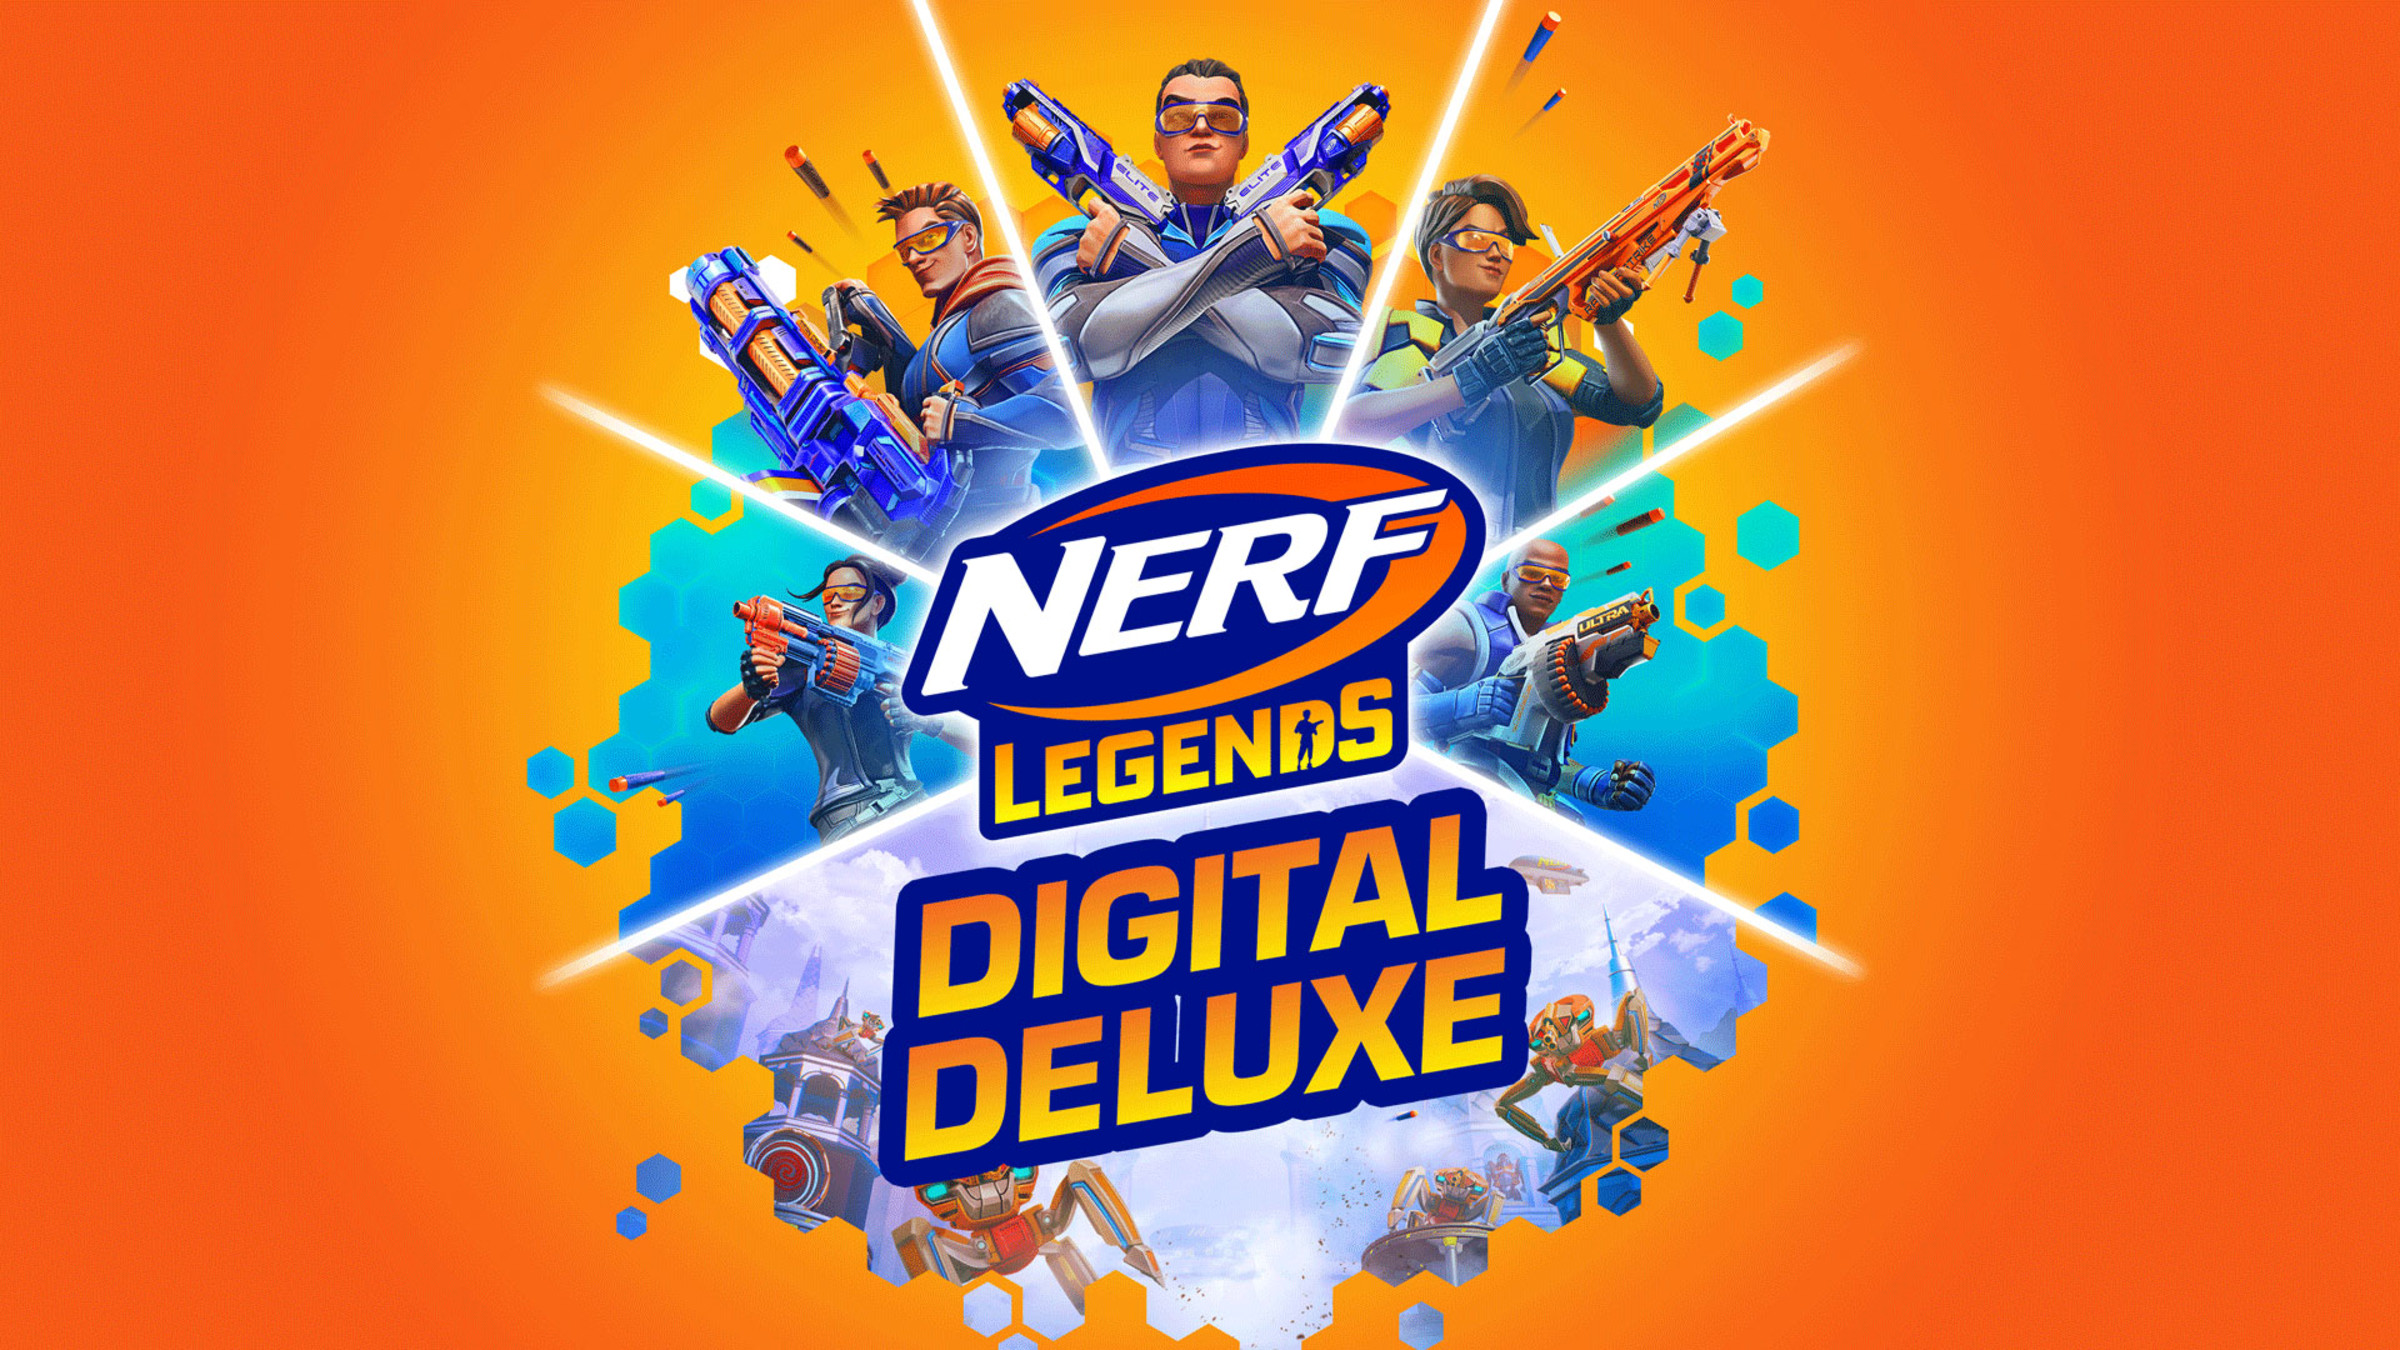 Nerf Legends – Digital Deluxe for Nintendo Switch - Nintendo Official Site